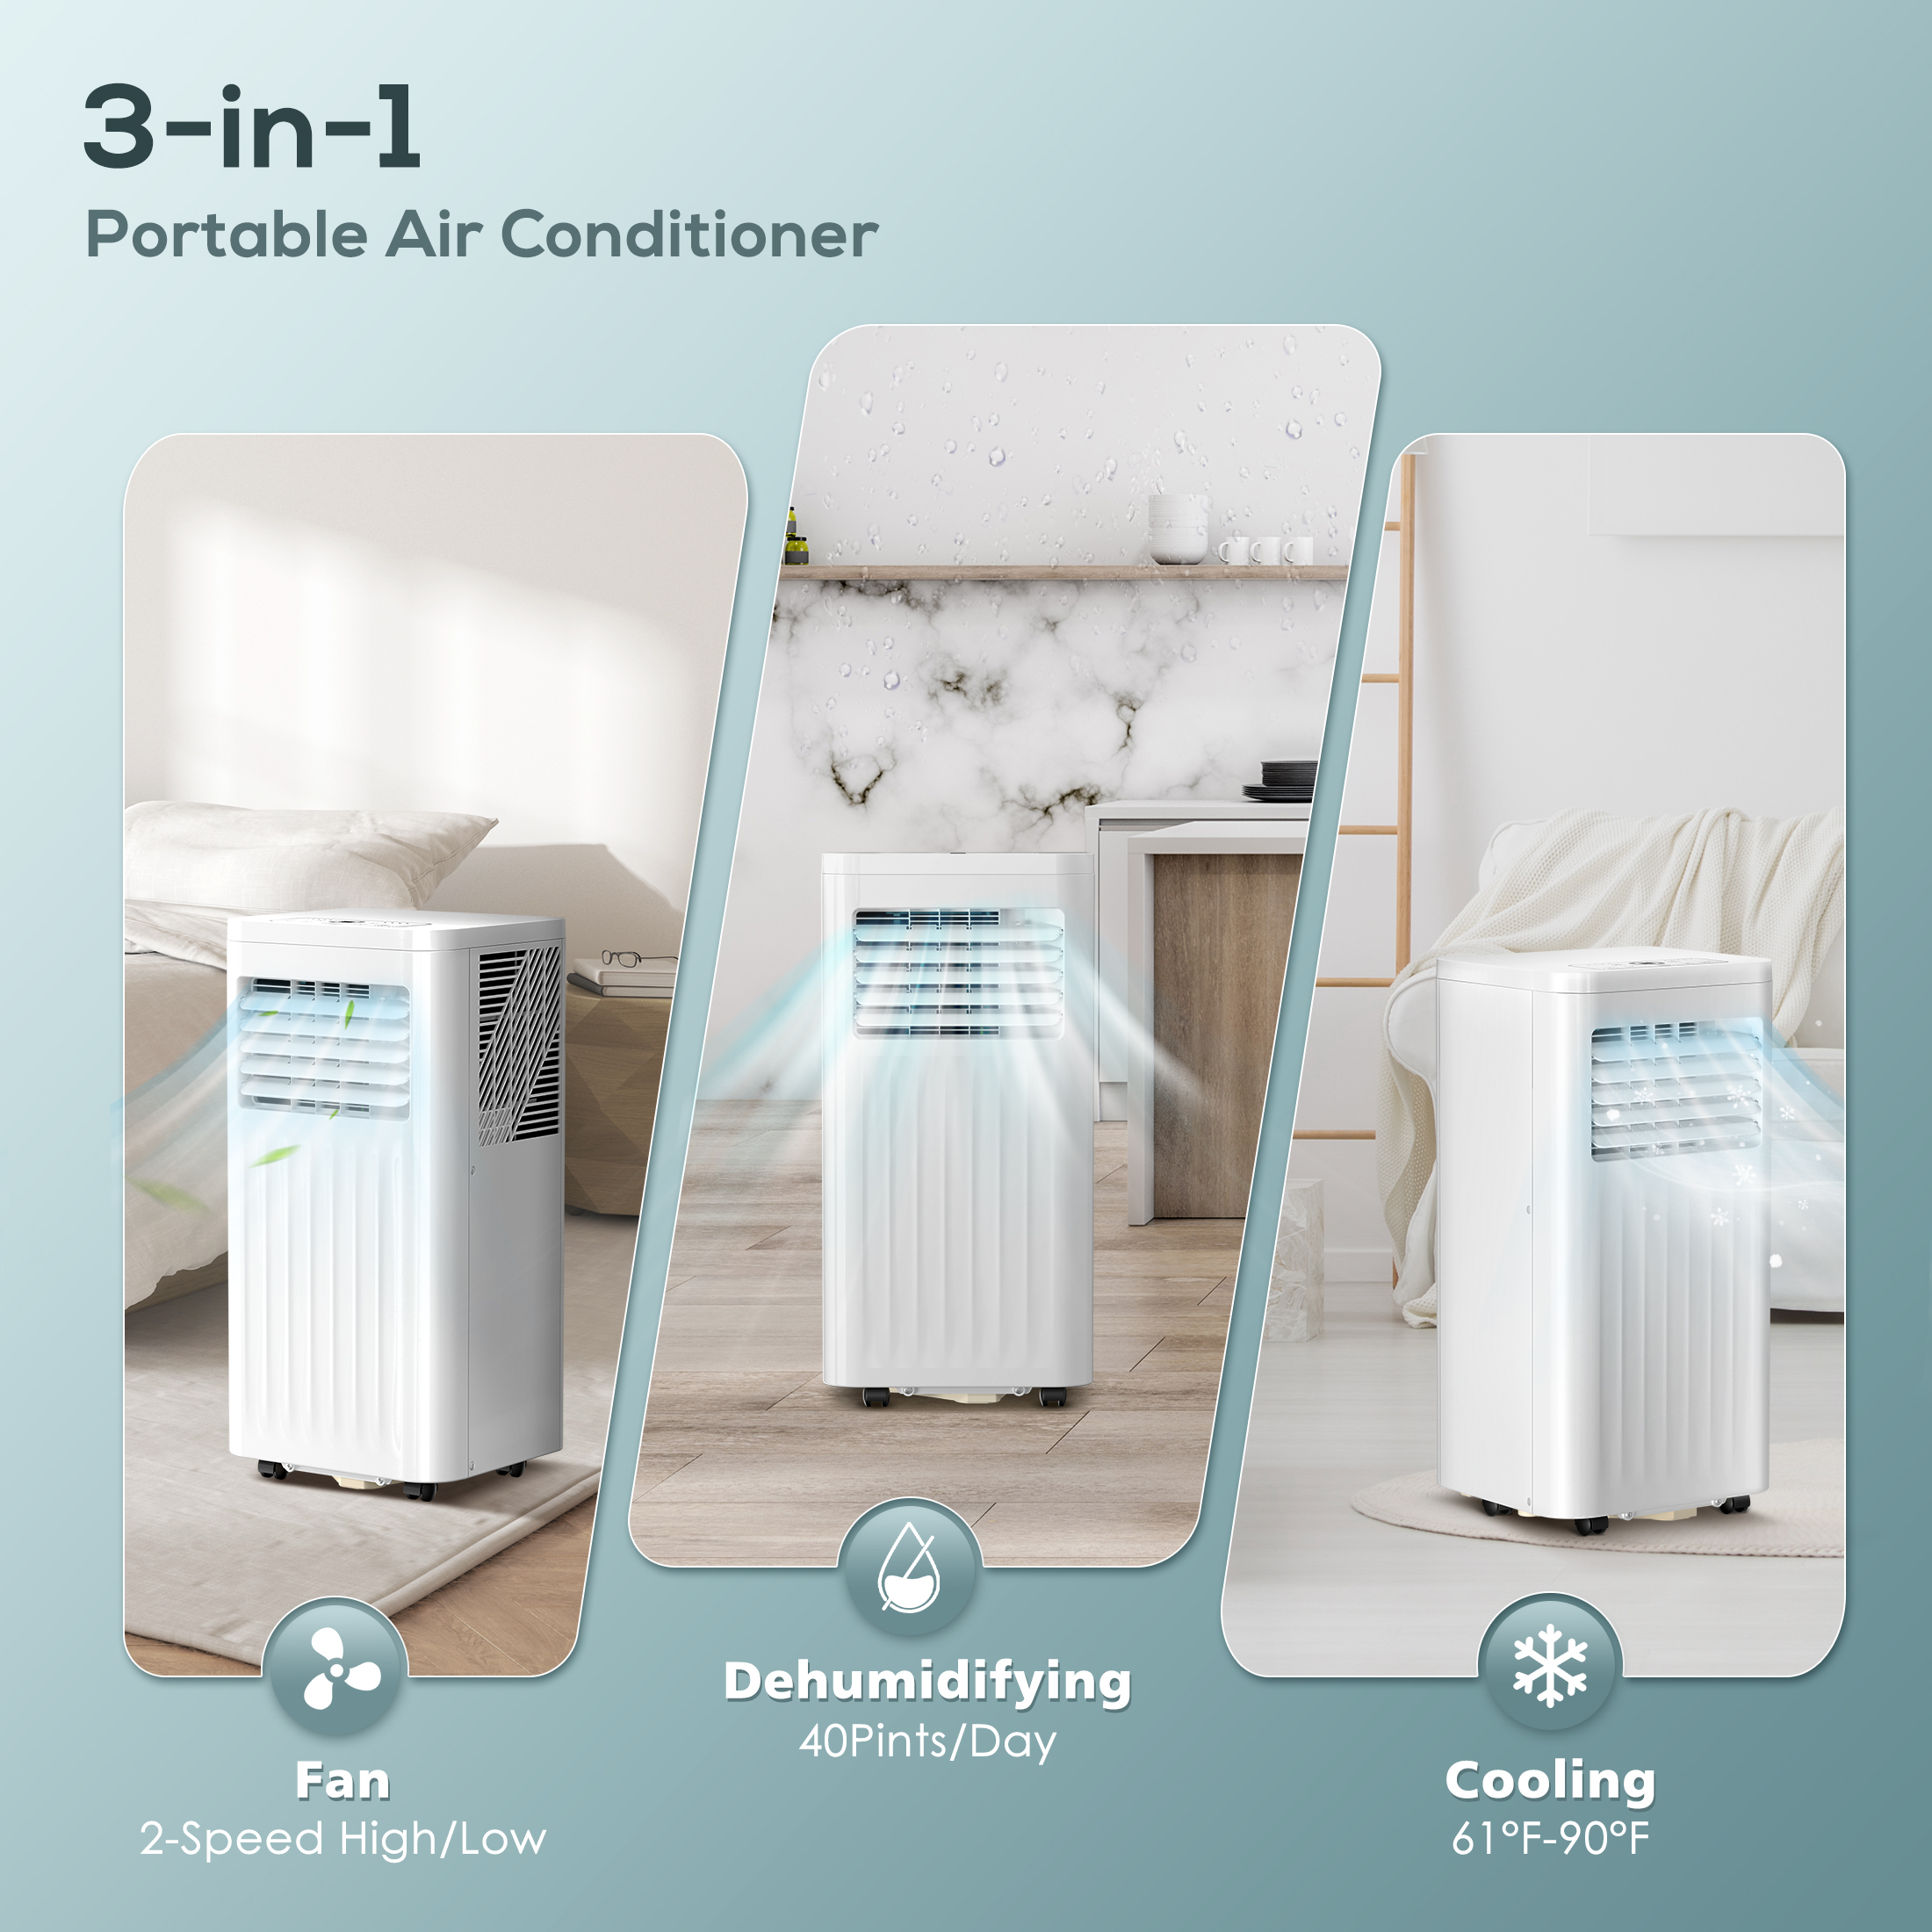 KISSAIR 6,000BTU( 10,000BTU ASHRAE) Portable Air Conditioner, Ultra Quiet 3-in-1 Cool/Dehumidifier/Fan, Air Conditioner with Remote Control for Home/Office-White - image 2 of 7